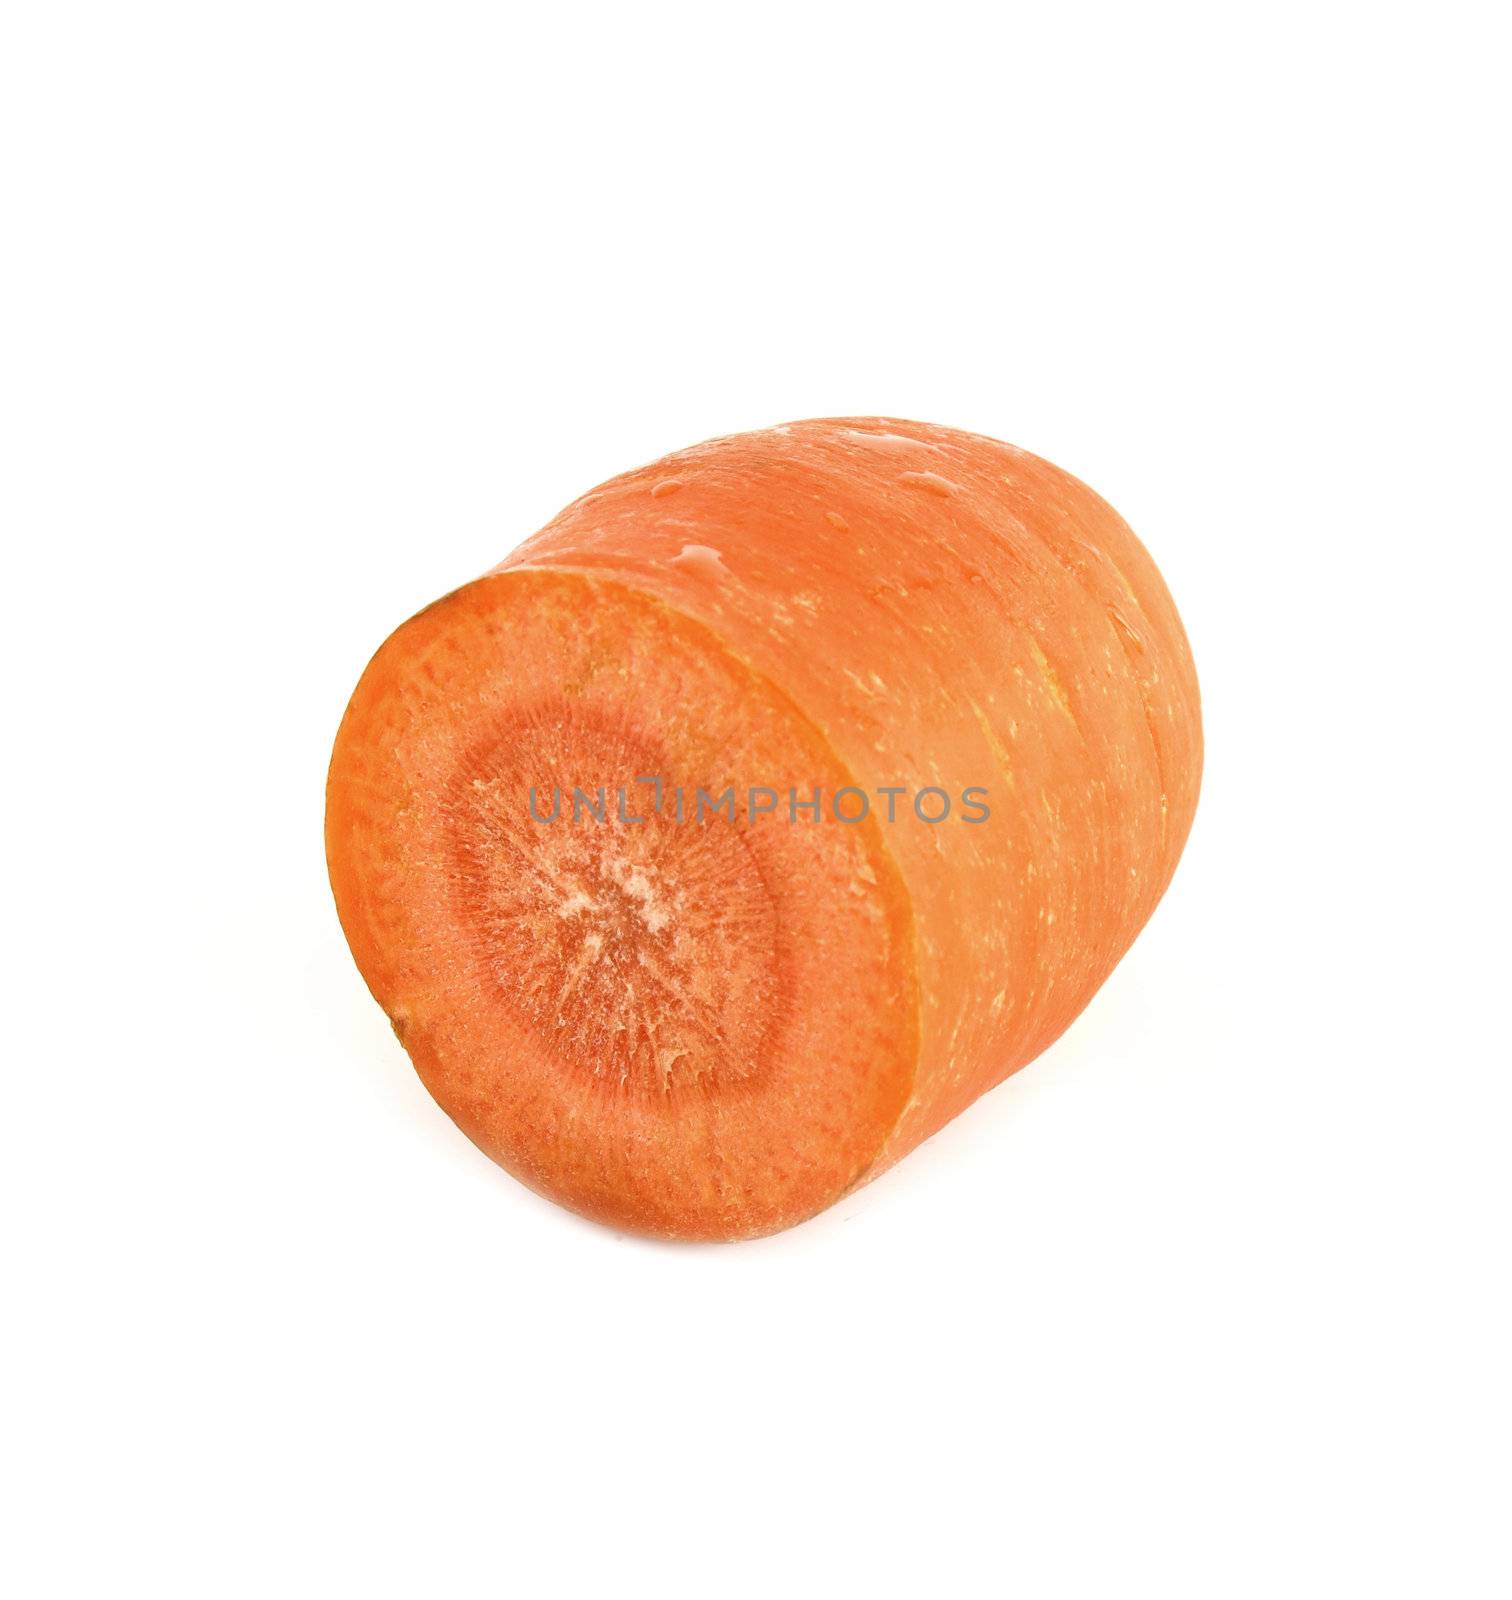 The cut carrots on a white background